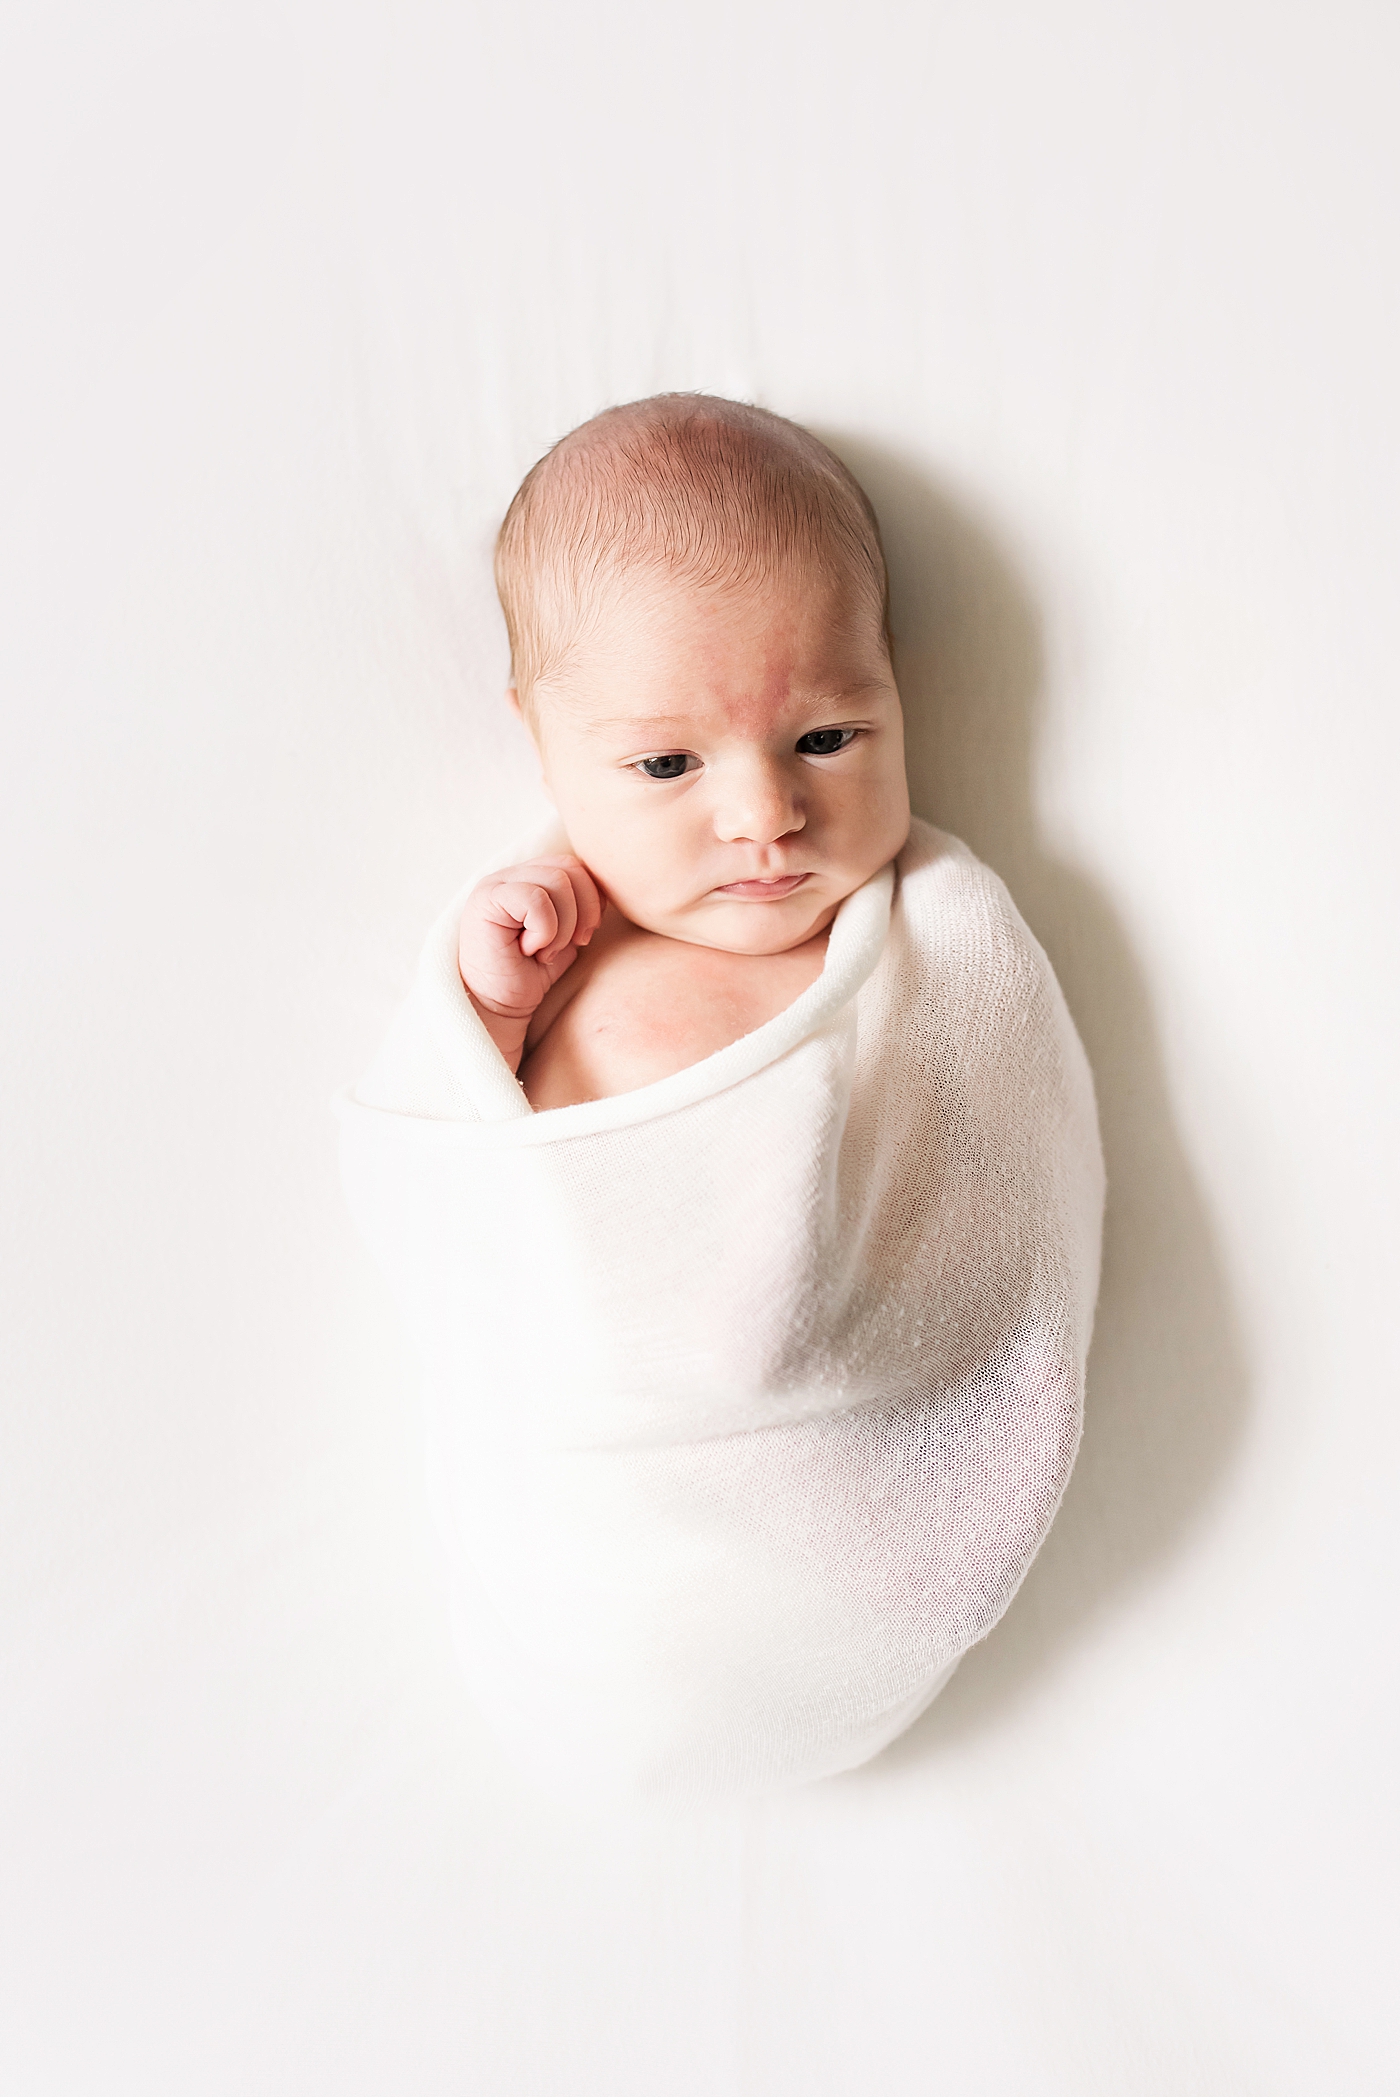 Baby girl awake wrapped in a white swaddle | Photo by Anna Wisjo Photography 